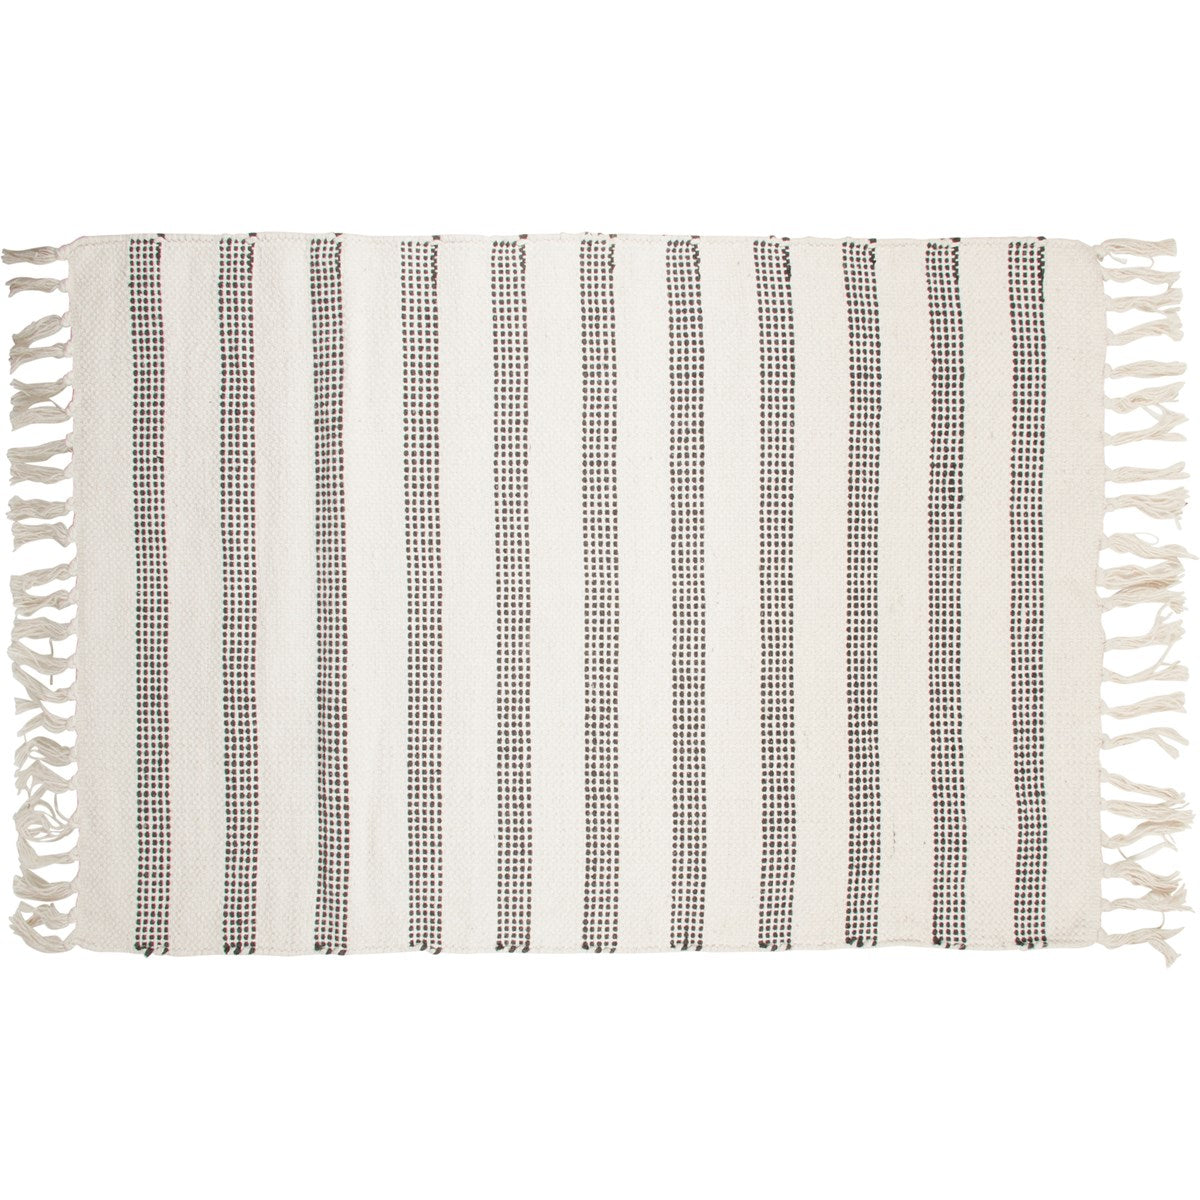 RED OR GRAY STRIPED RUG